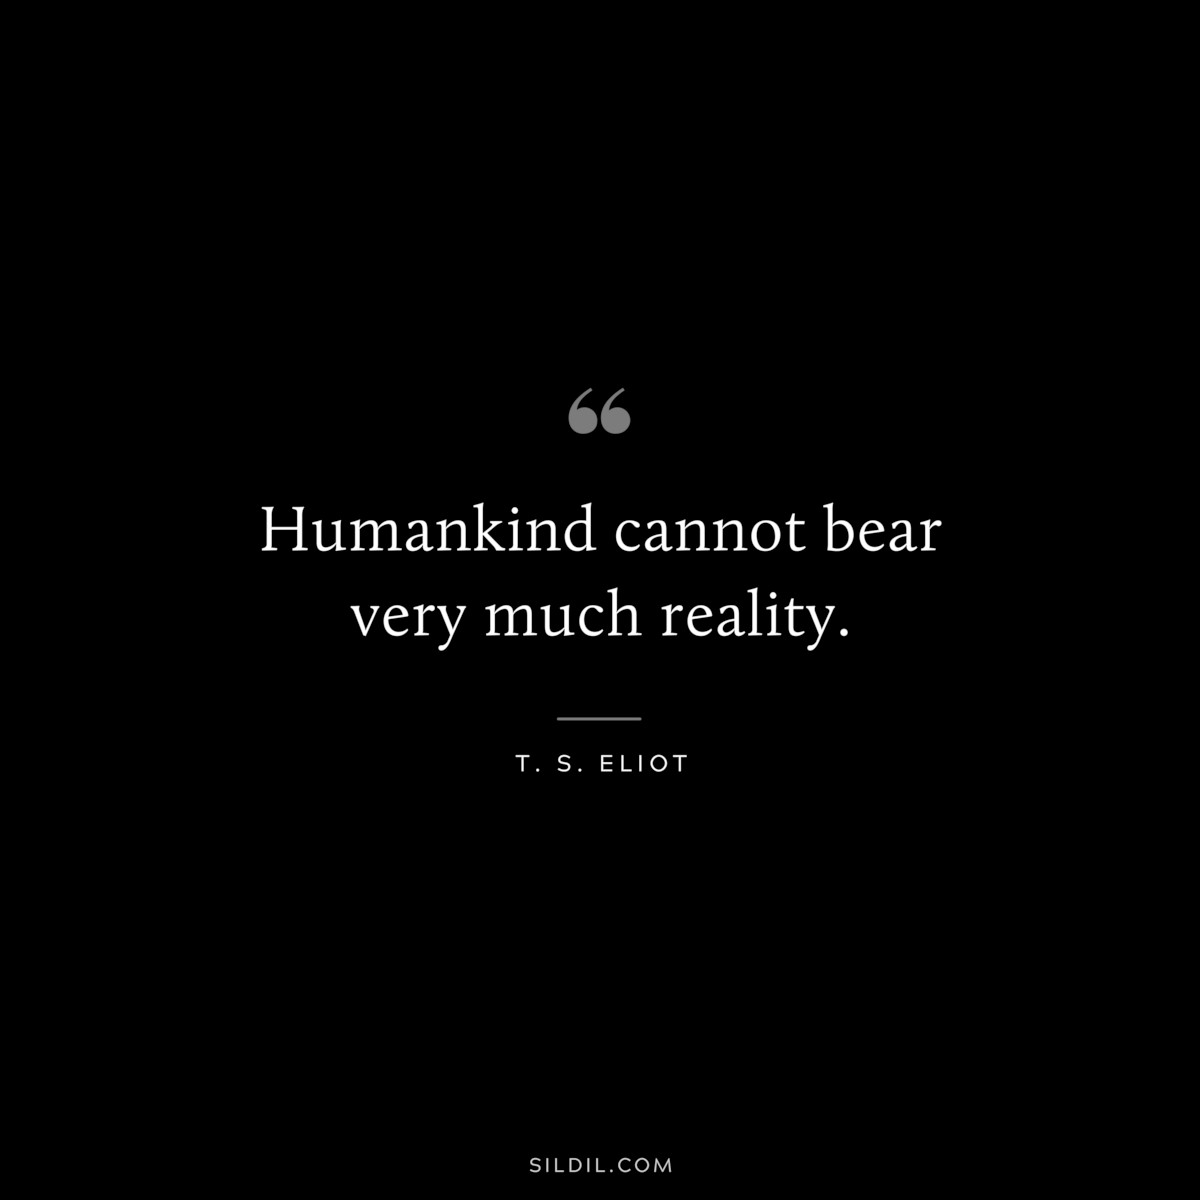 Humankind cannot bear very much reality. ― T. S. Eliot